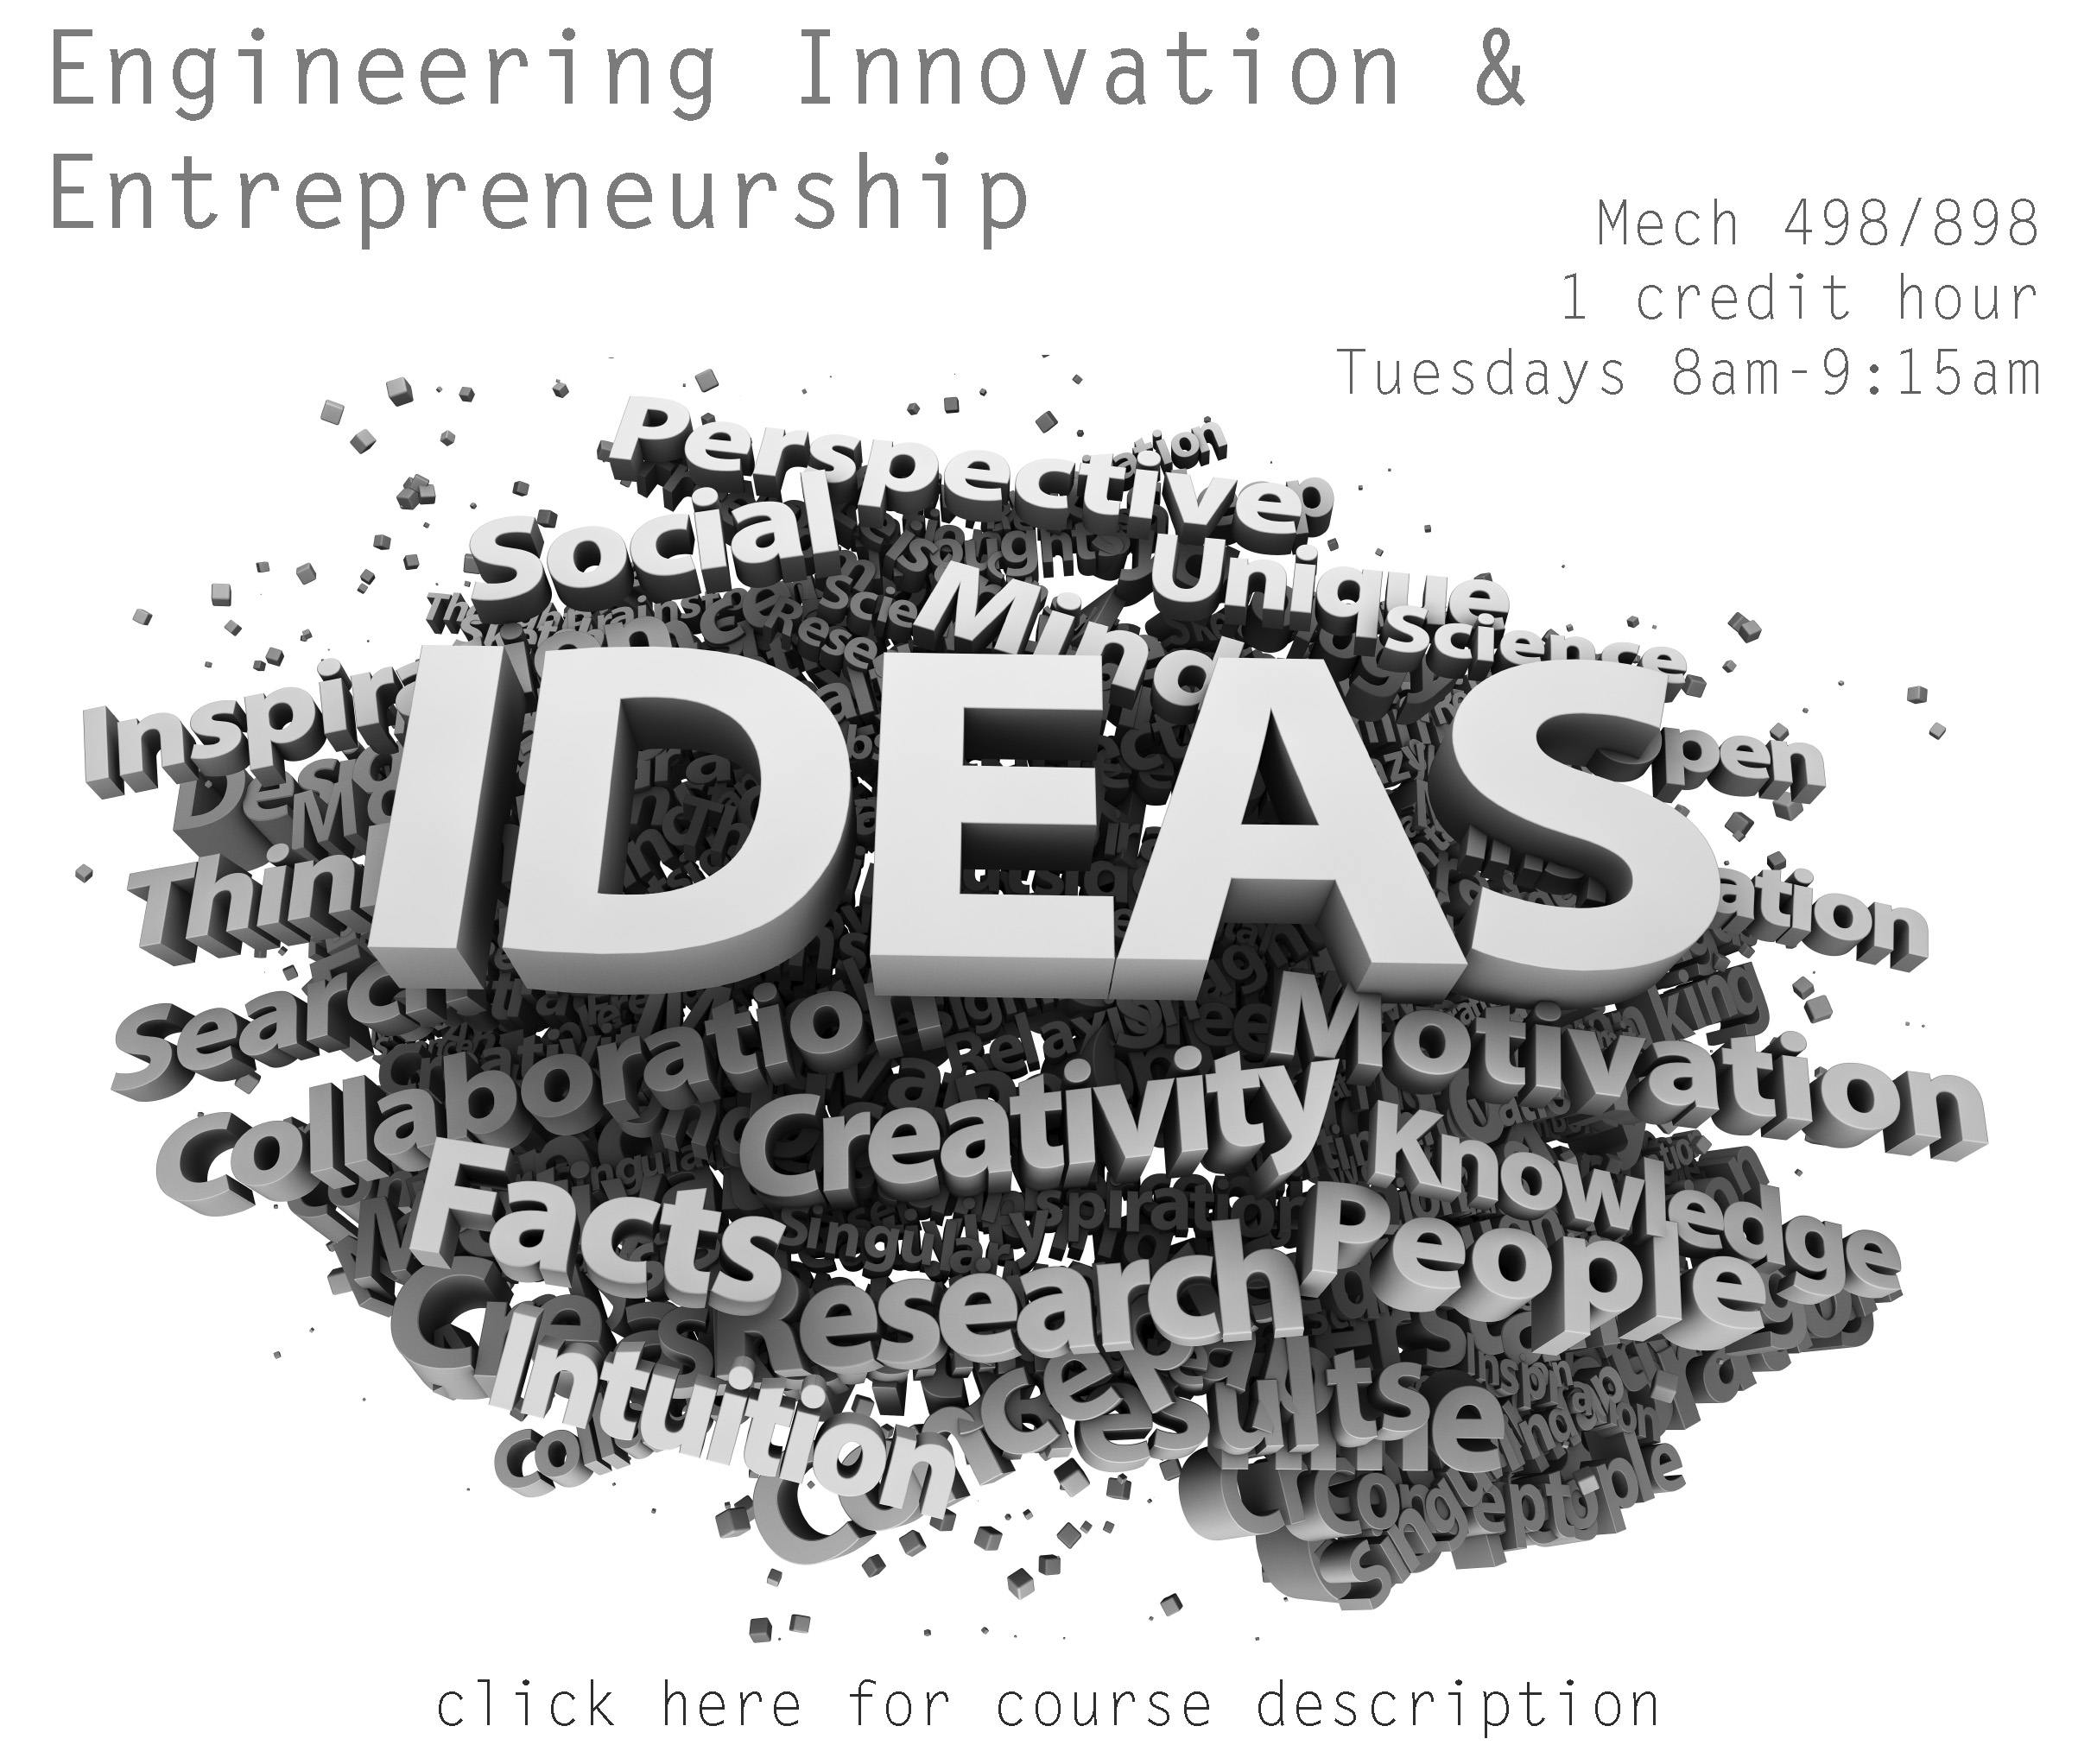 Engineering Innovation & Entrepreneurship, a new course for Spring 2011